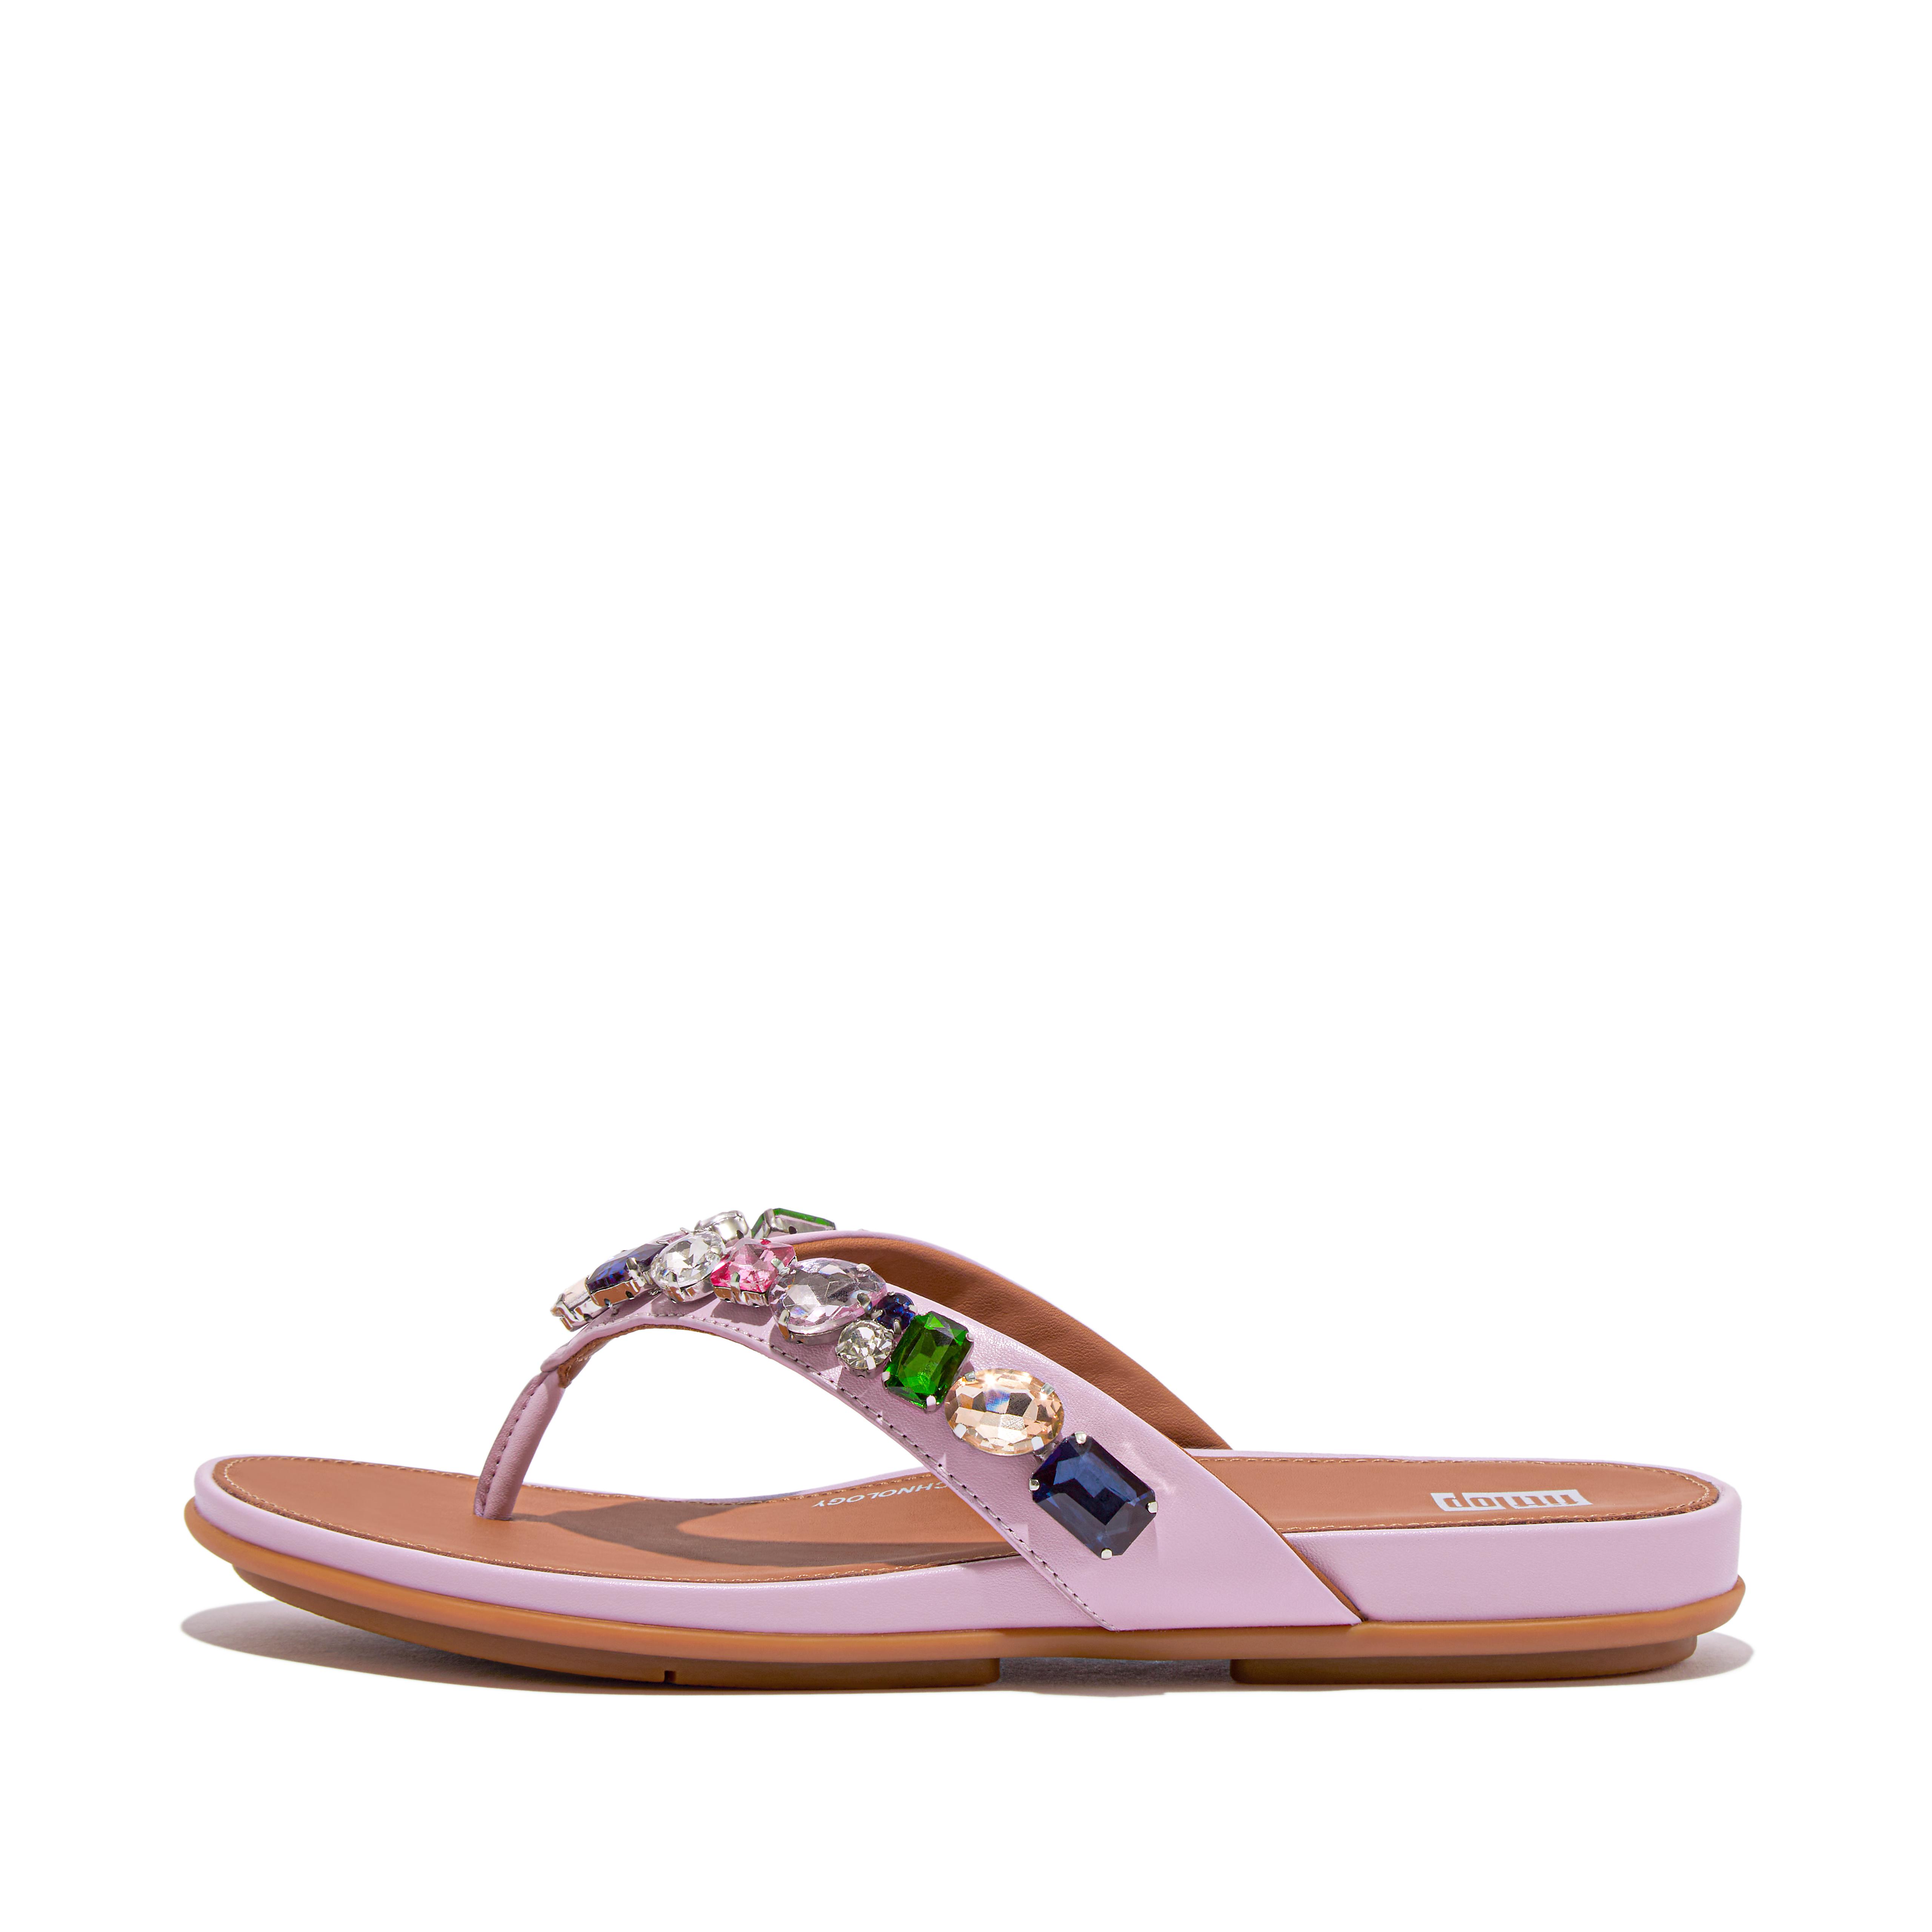 Fitflop Jewel-Deluxe Leather Flip-Flops,wild lilac